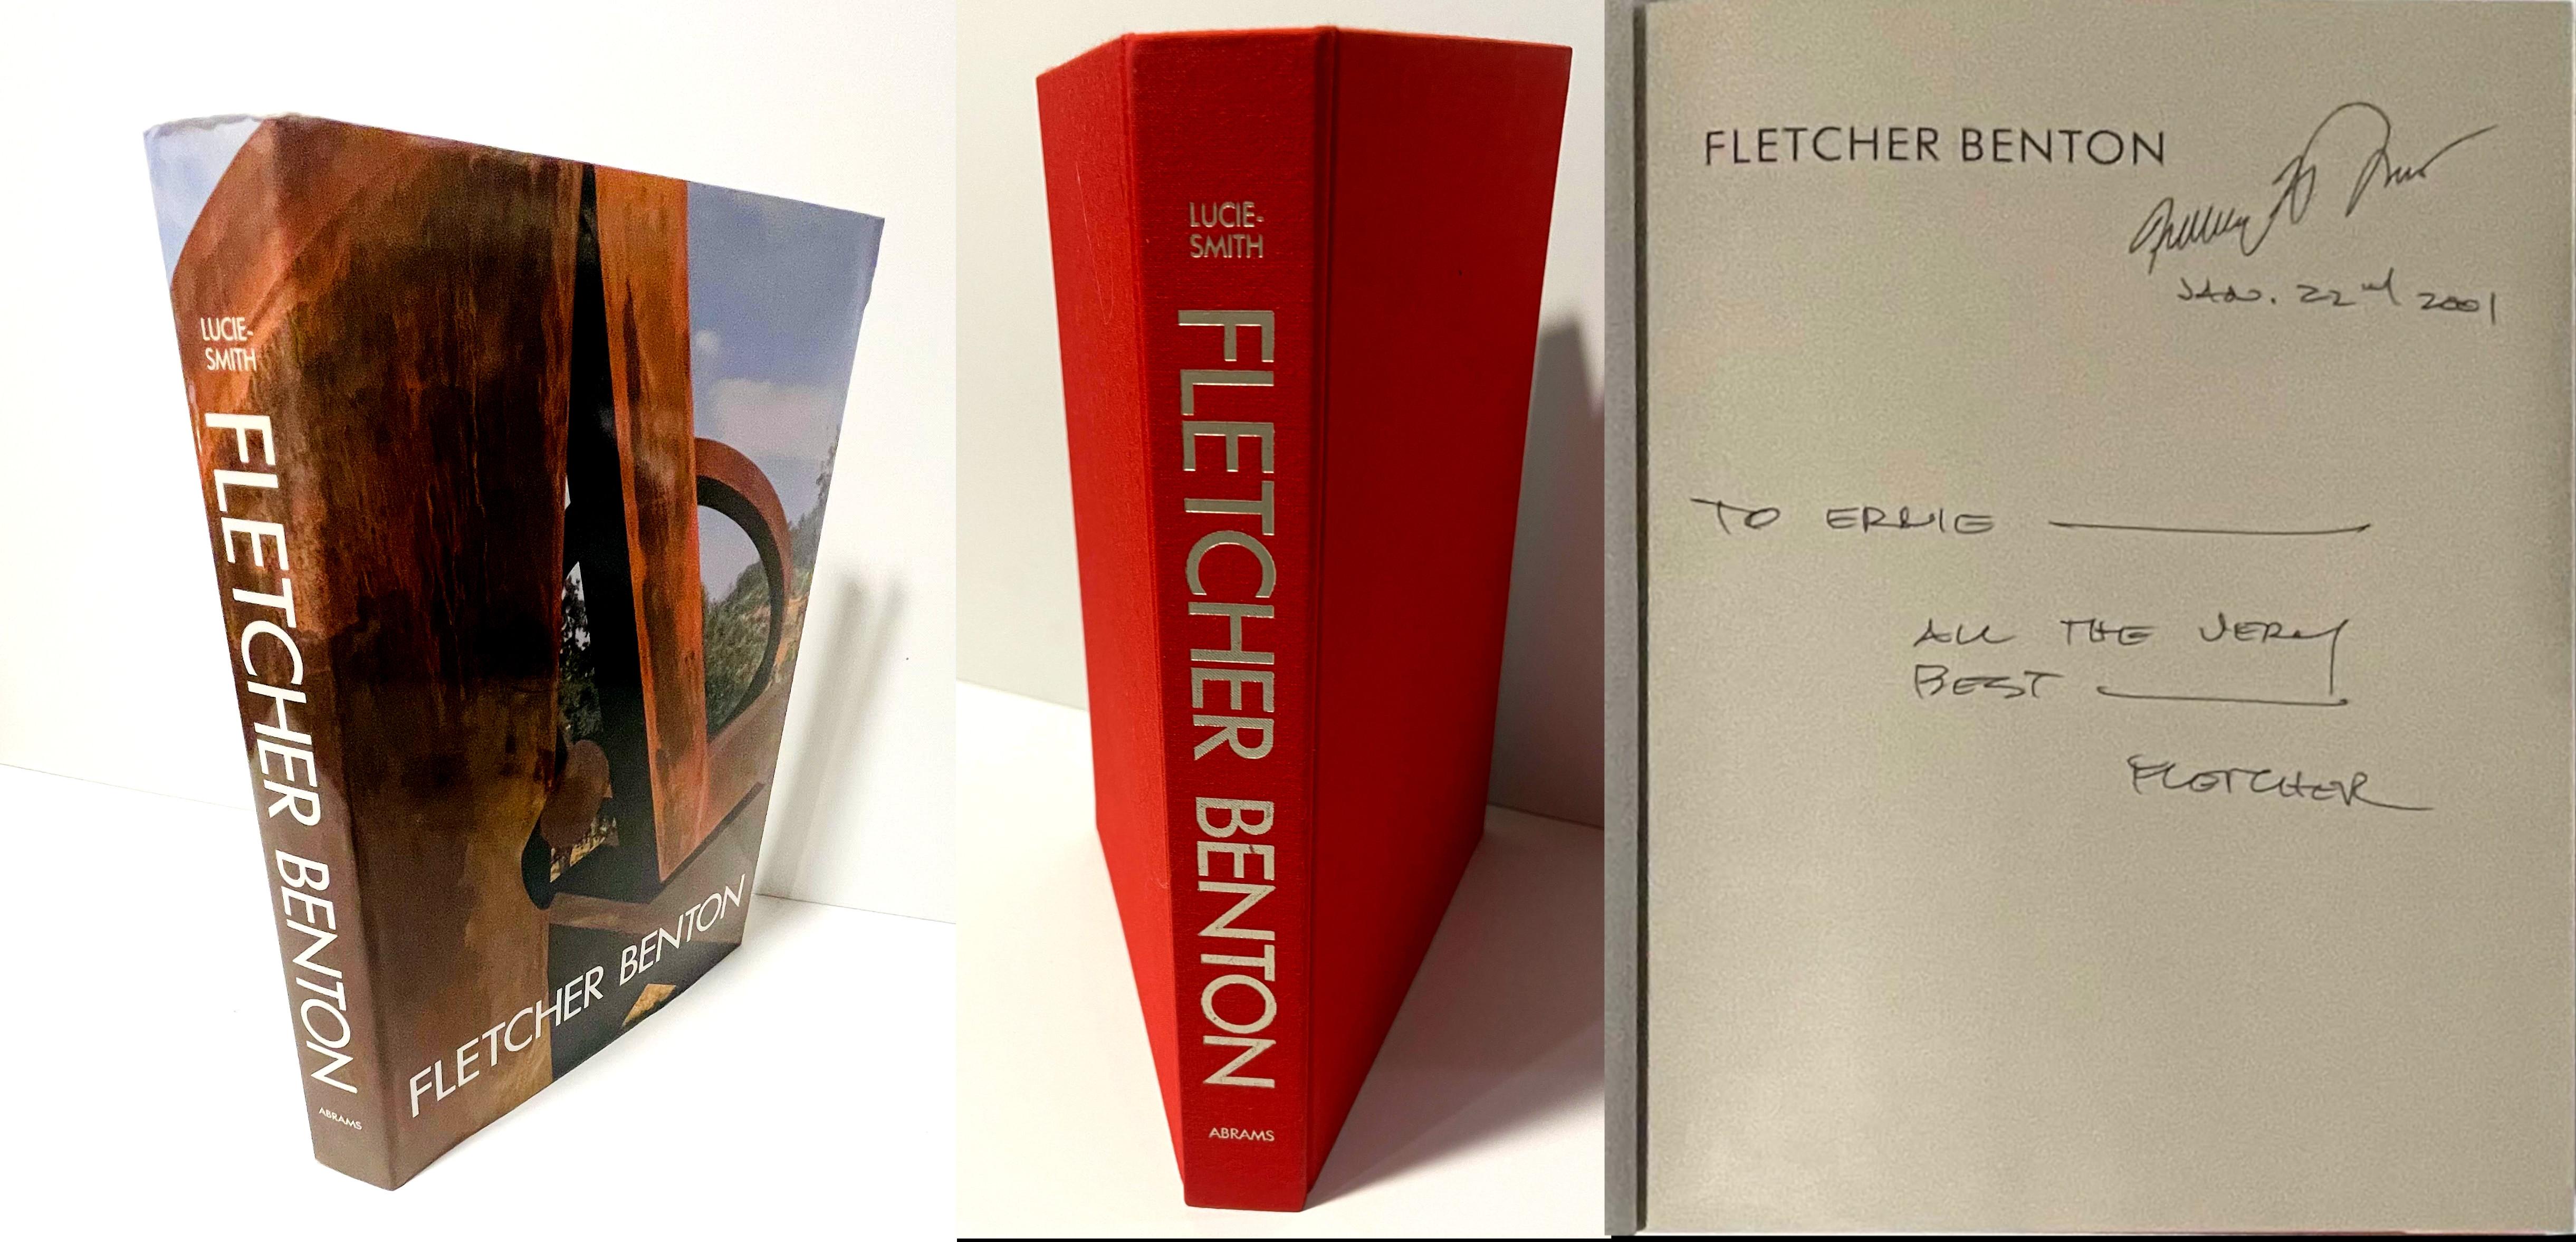 Fletcher Benton
Large hardback monograph (hand signed twice by Fletcher Benton), 1990
Hardback monograph with cloth boards and dust jacket (hand signed twice and inscribed to Ernie)
hand signed twice, dated and inscribed in graphite by Fletcher